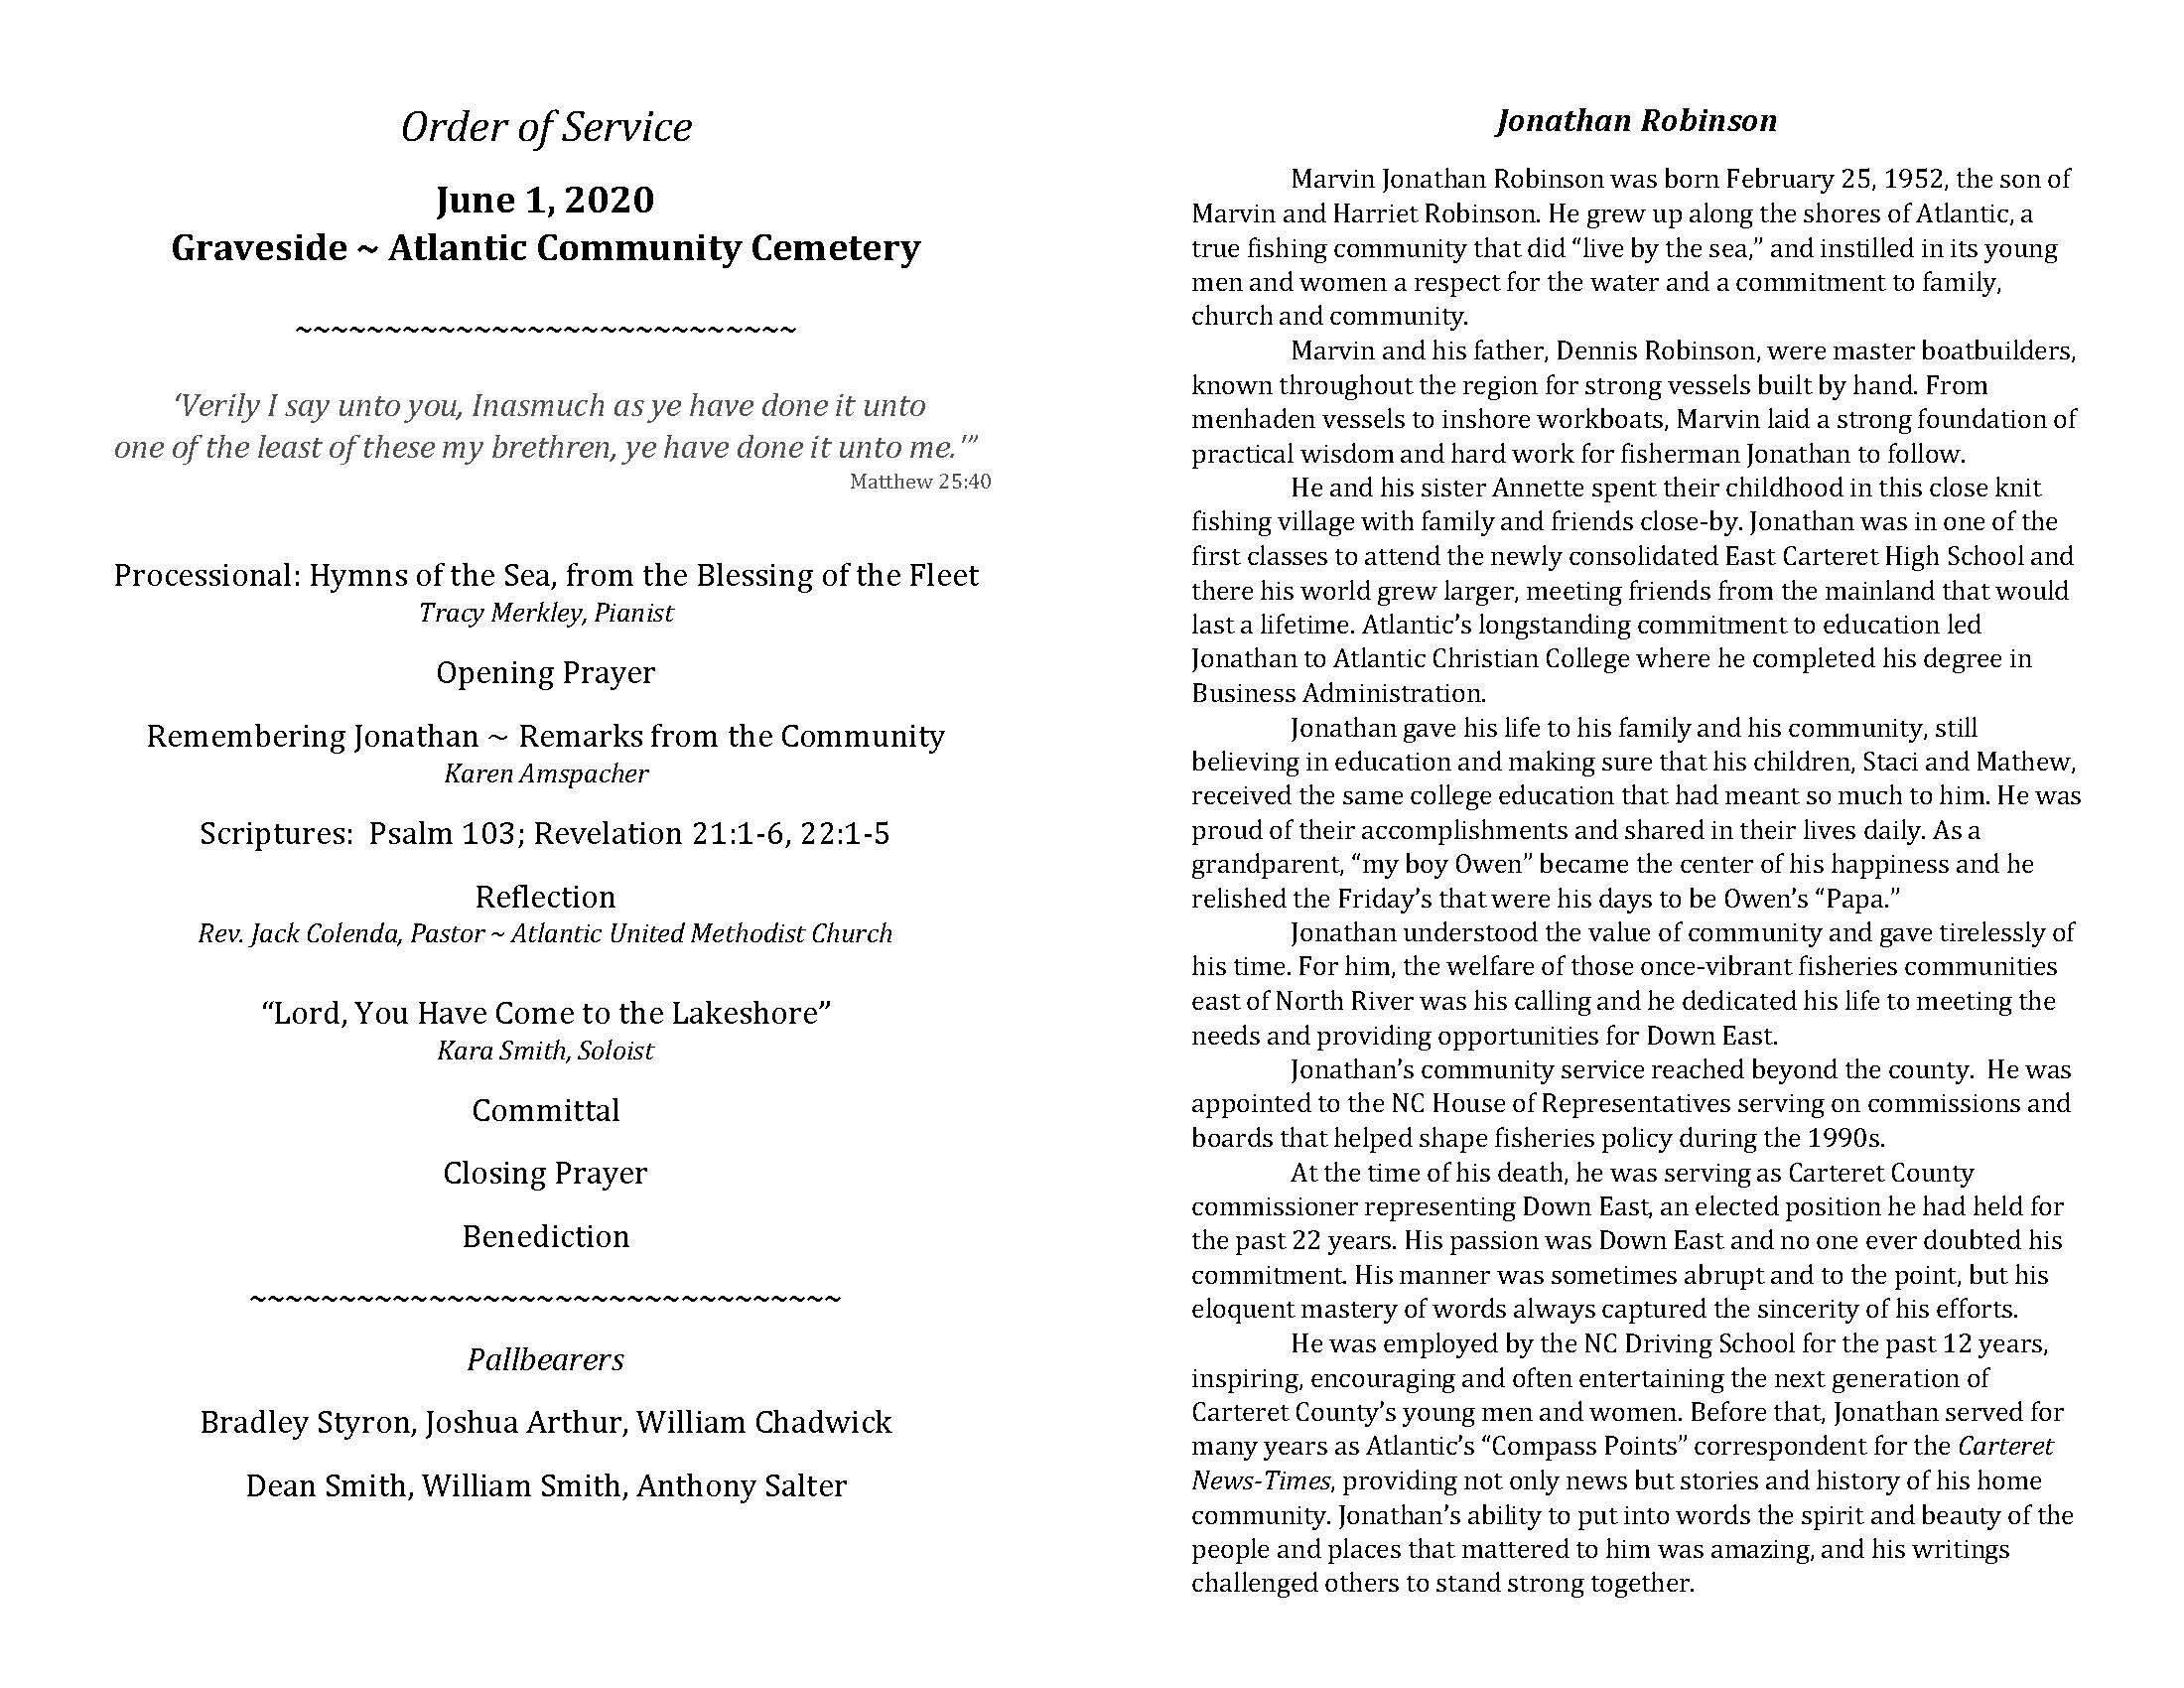 FINAL2 A Jonathan - Order of Service_Page_1.jpg